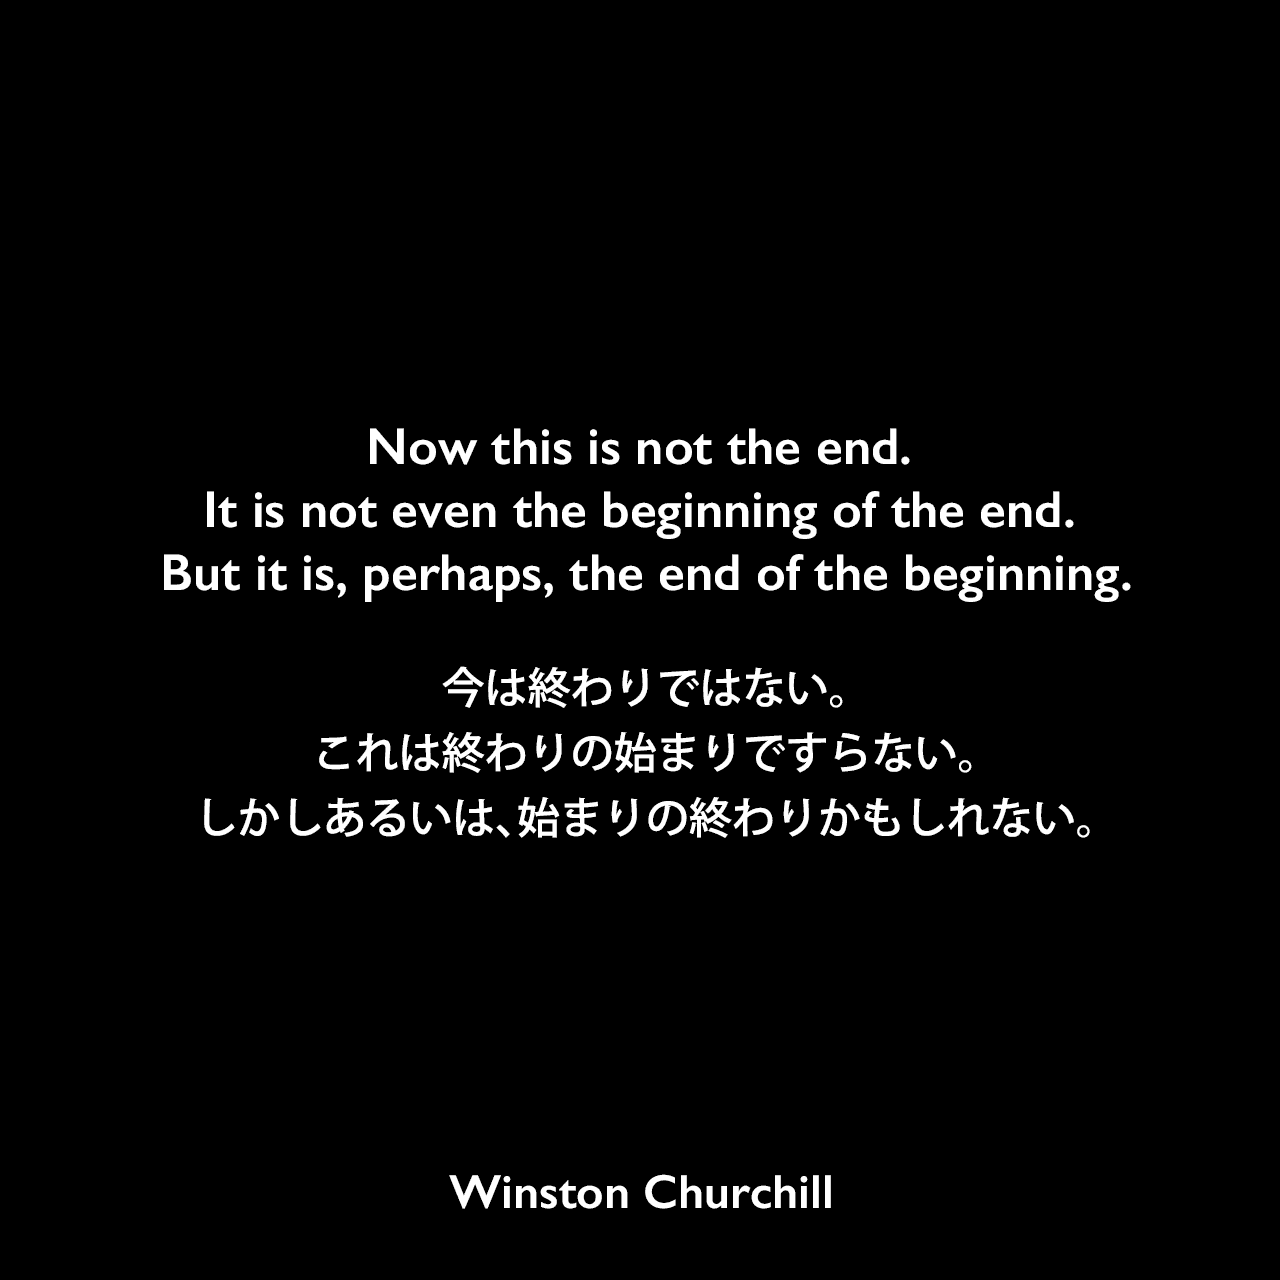 Now this is not the end. It is not even the beginning of the end. But it is, perhaps, the end of the beginning.今は終わりではない。これは終わりの始まりですらない。しかしあるいは、始まりの終わりかもしれない。- 1942年、ロンドン市長との昼食会でのスピーチよりWinston Churchill